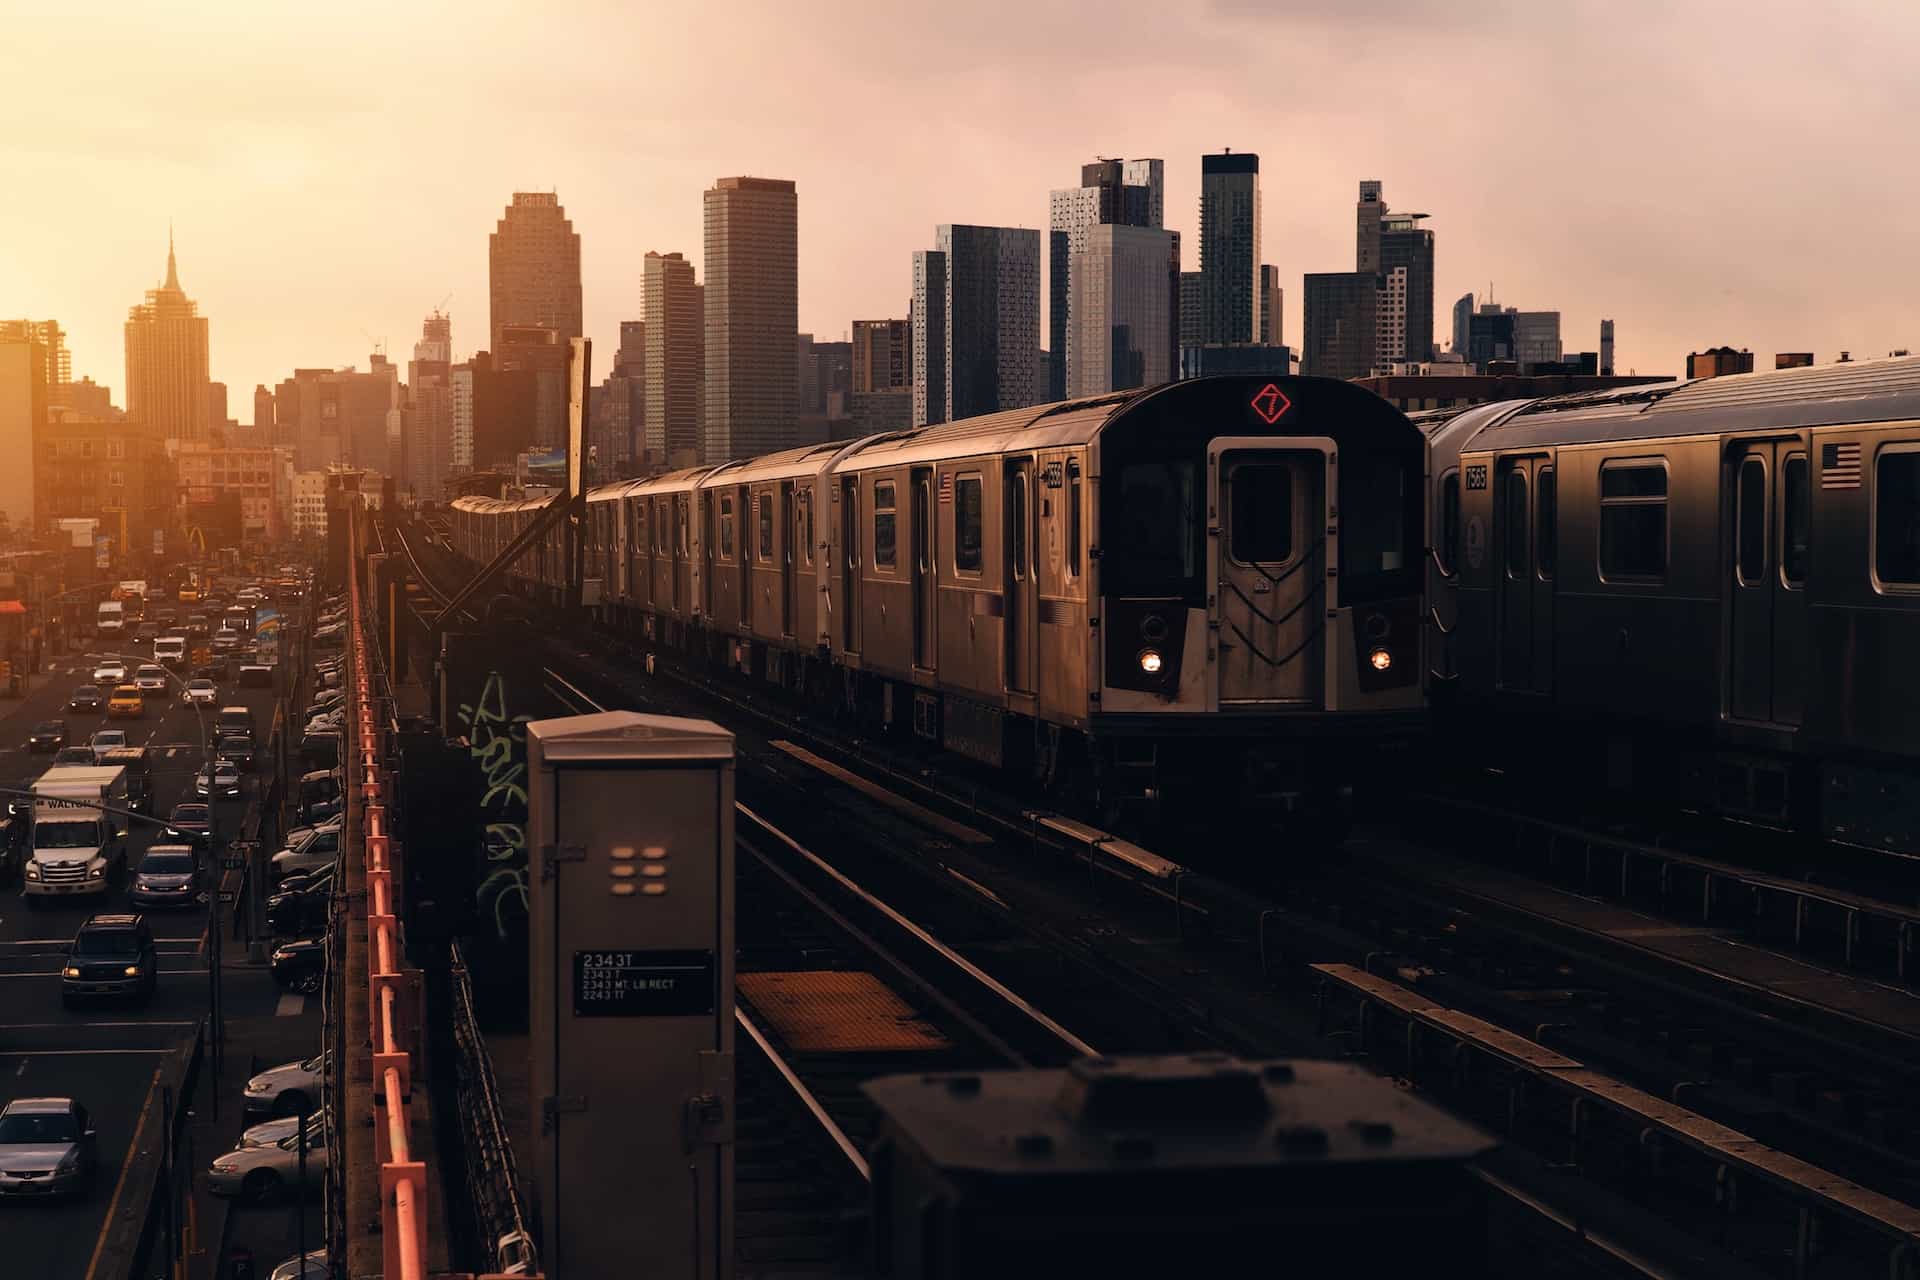 The 7 train in the New York subway system riding overground away from the island of Manhattan into the borough of Queens while the sun sets in the background.